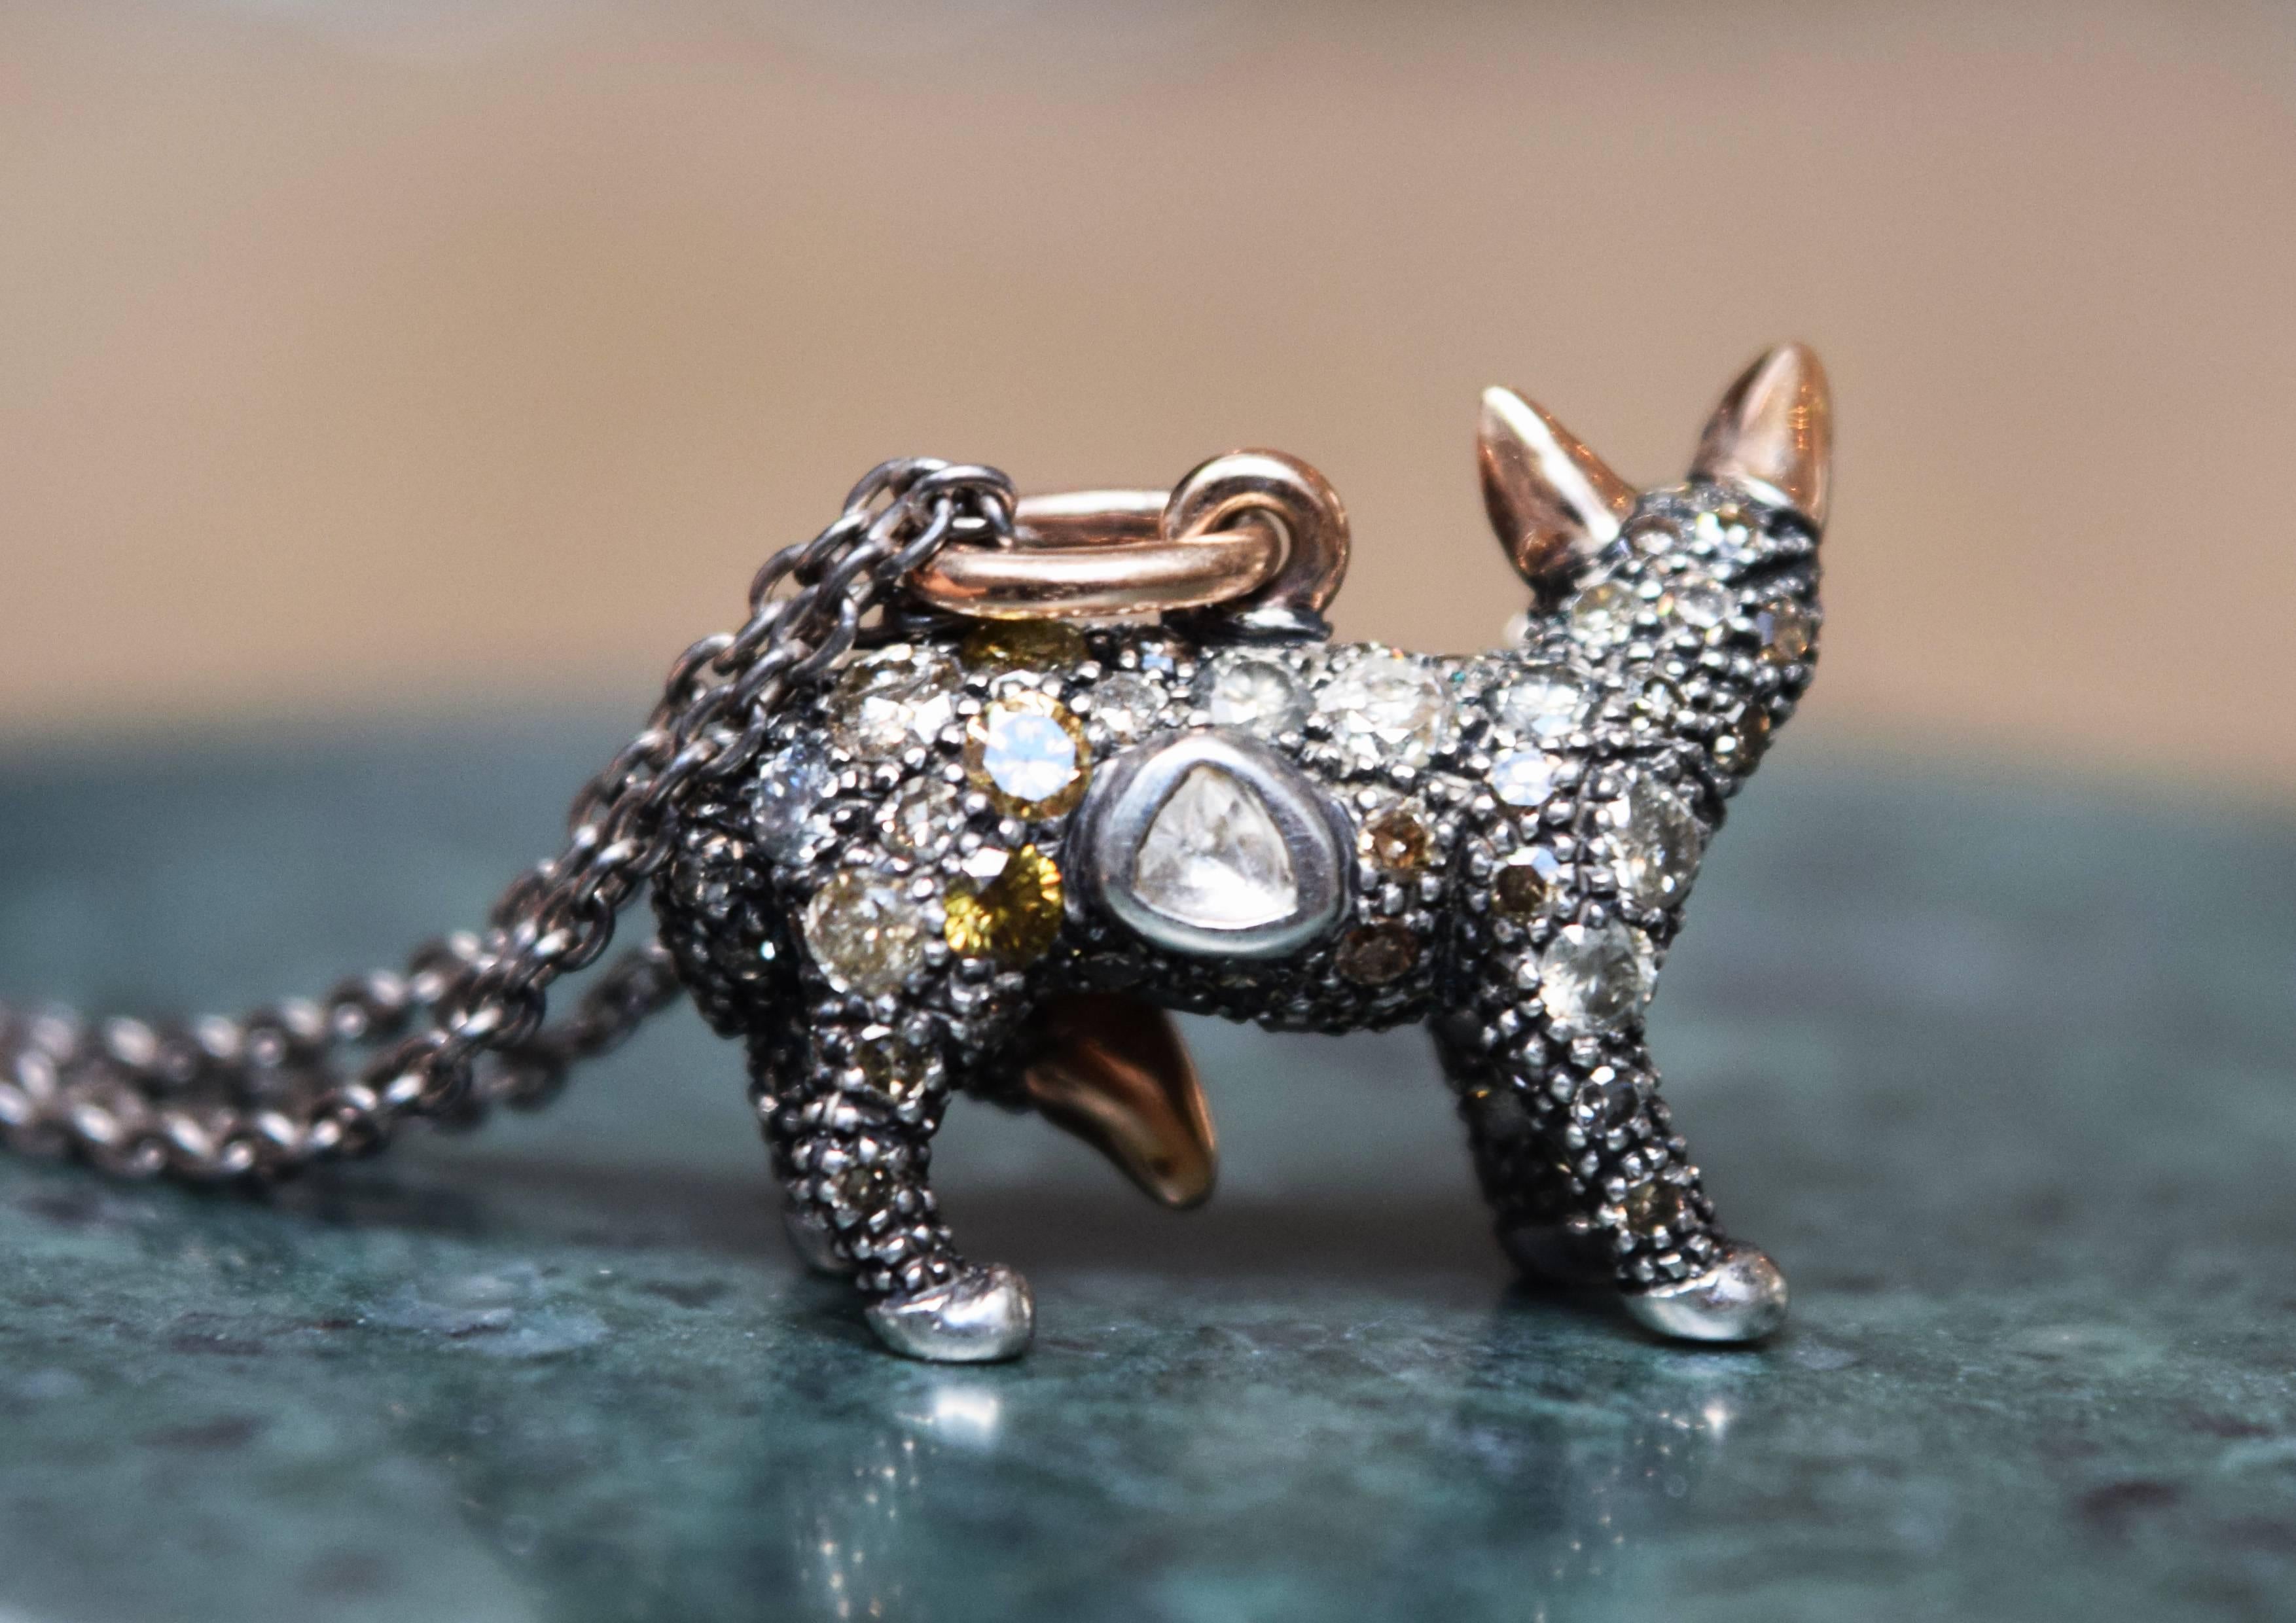 The Fox Necklace, by Bibi van der Velden, is made of Sterling Silver fully-set with light brown diamonds, with Blue Sapphire eyes, polky diamonds and 18k rose gold accents. It includes a Sterling Silver double chain, of 70cm length that is